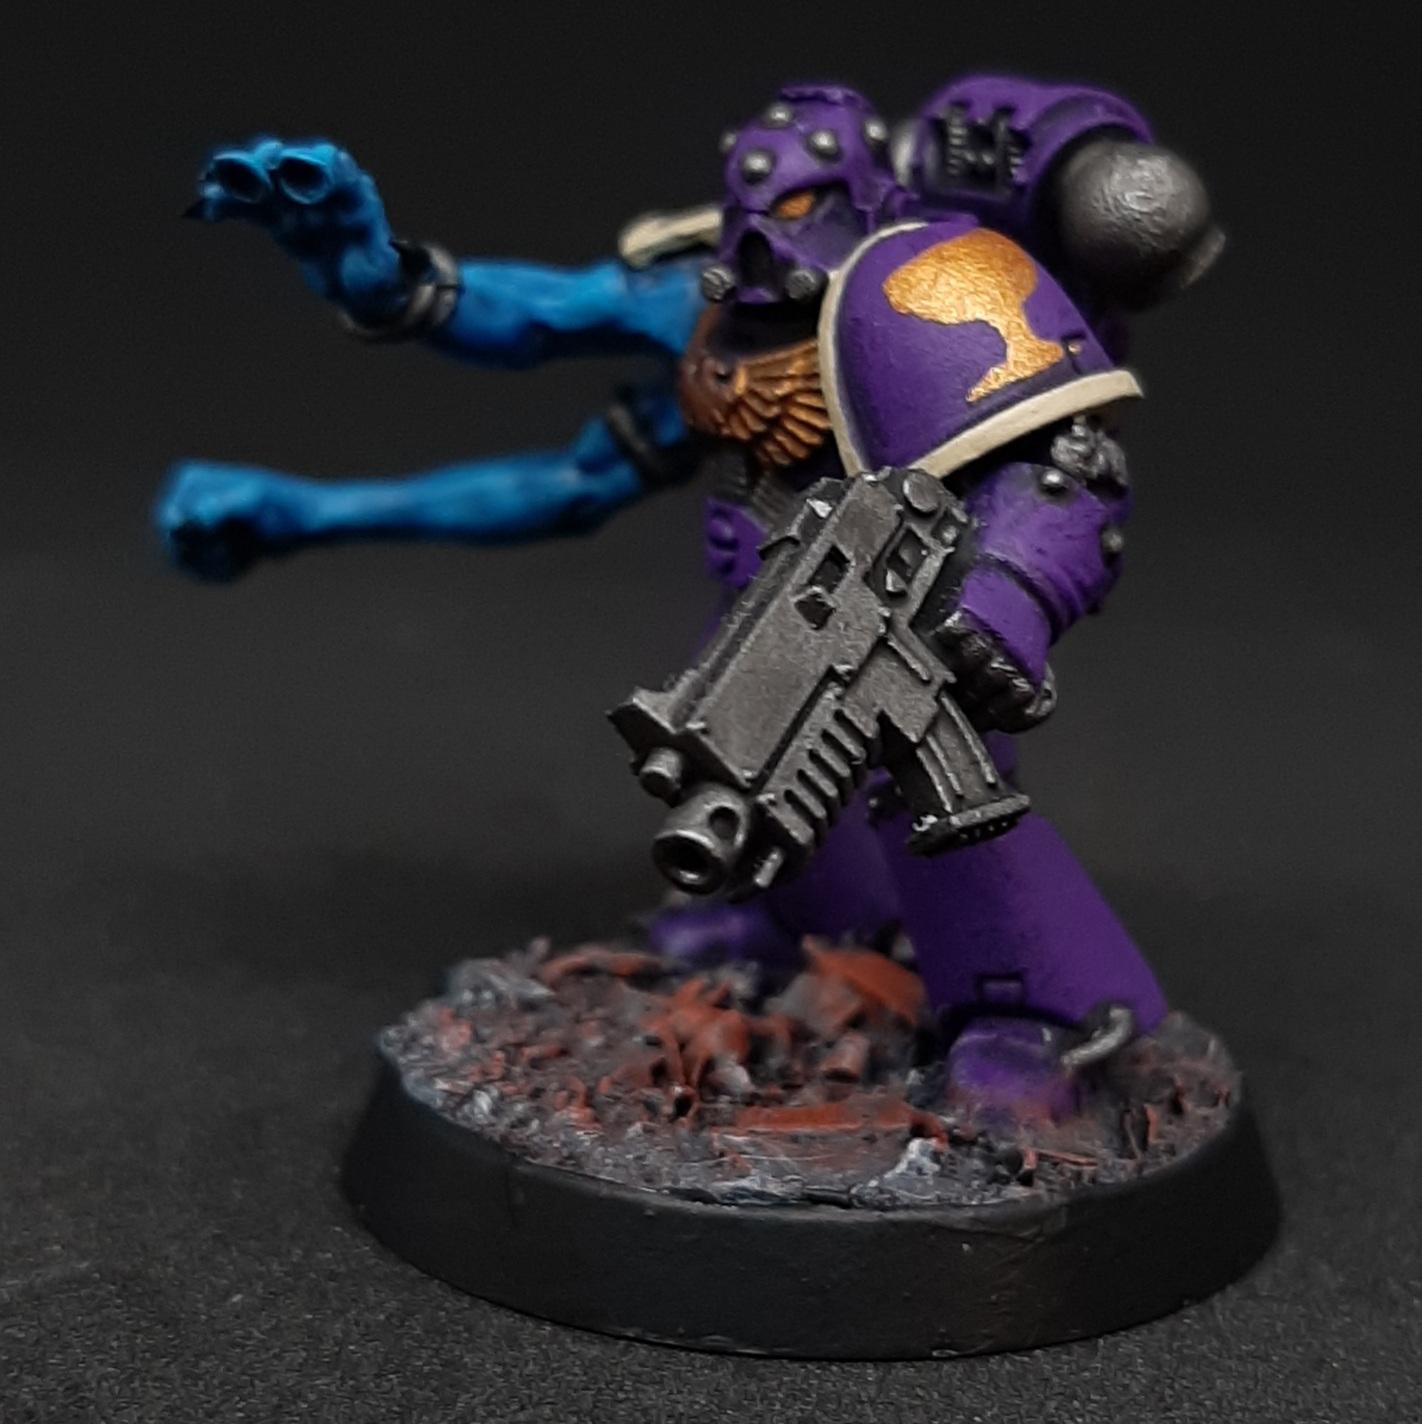 Army, Assault, Bone, Chalice, Cold, Conversion, Custom, Drinkers, Fast, Kitbash, Miniatures, Mutant, Mutation, Purple, Renegade, Seelentrinker, Soul, Souldrinkers, Space Marines, Squad, Tactical, Traitor, Warhammer 40,000, Warhammer Fantasy